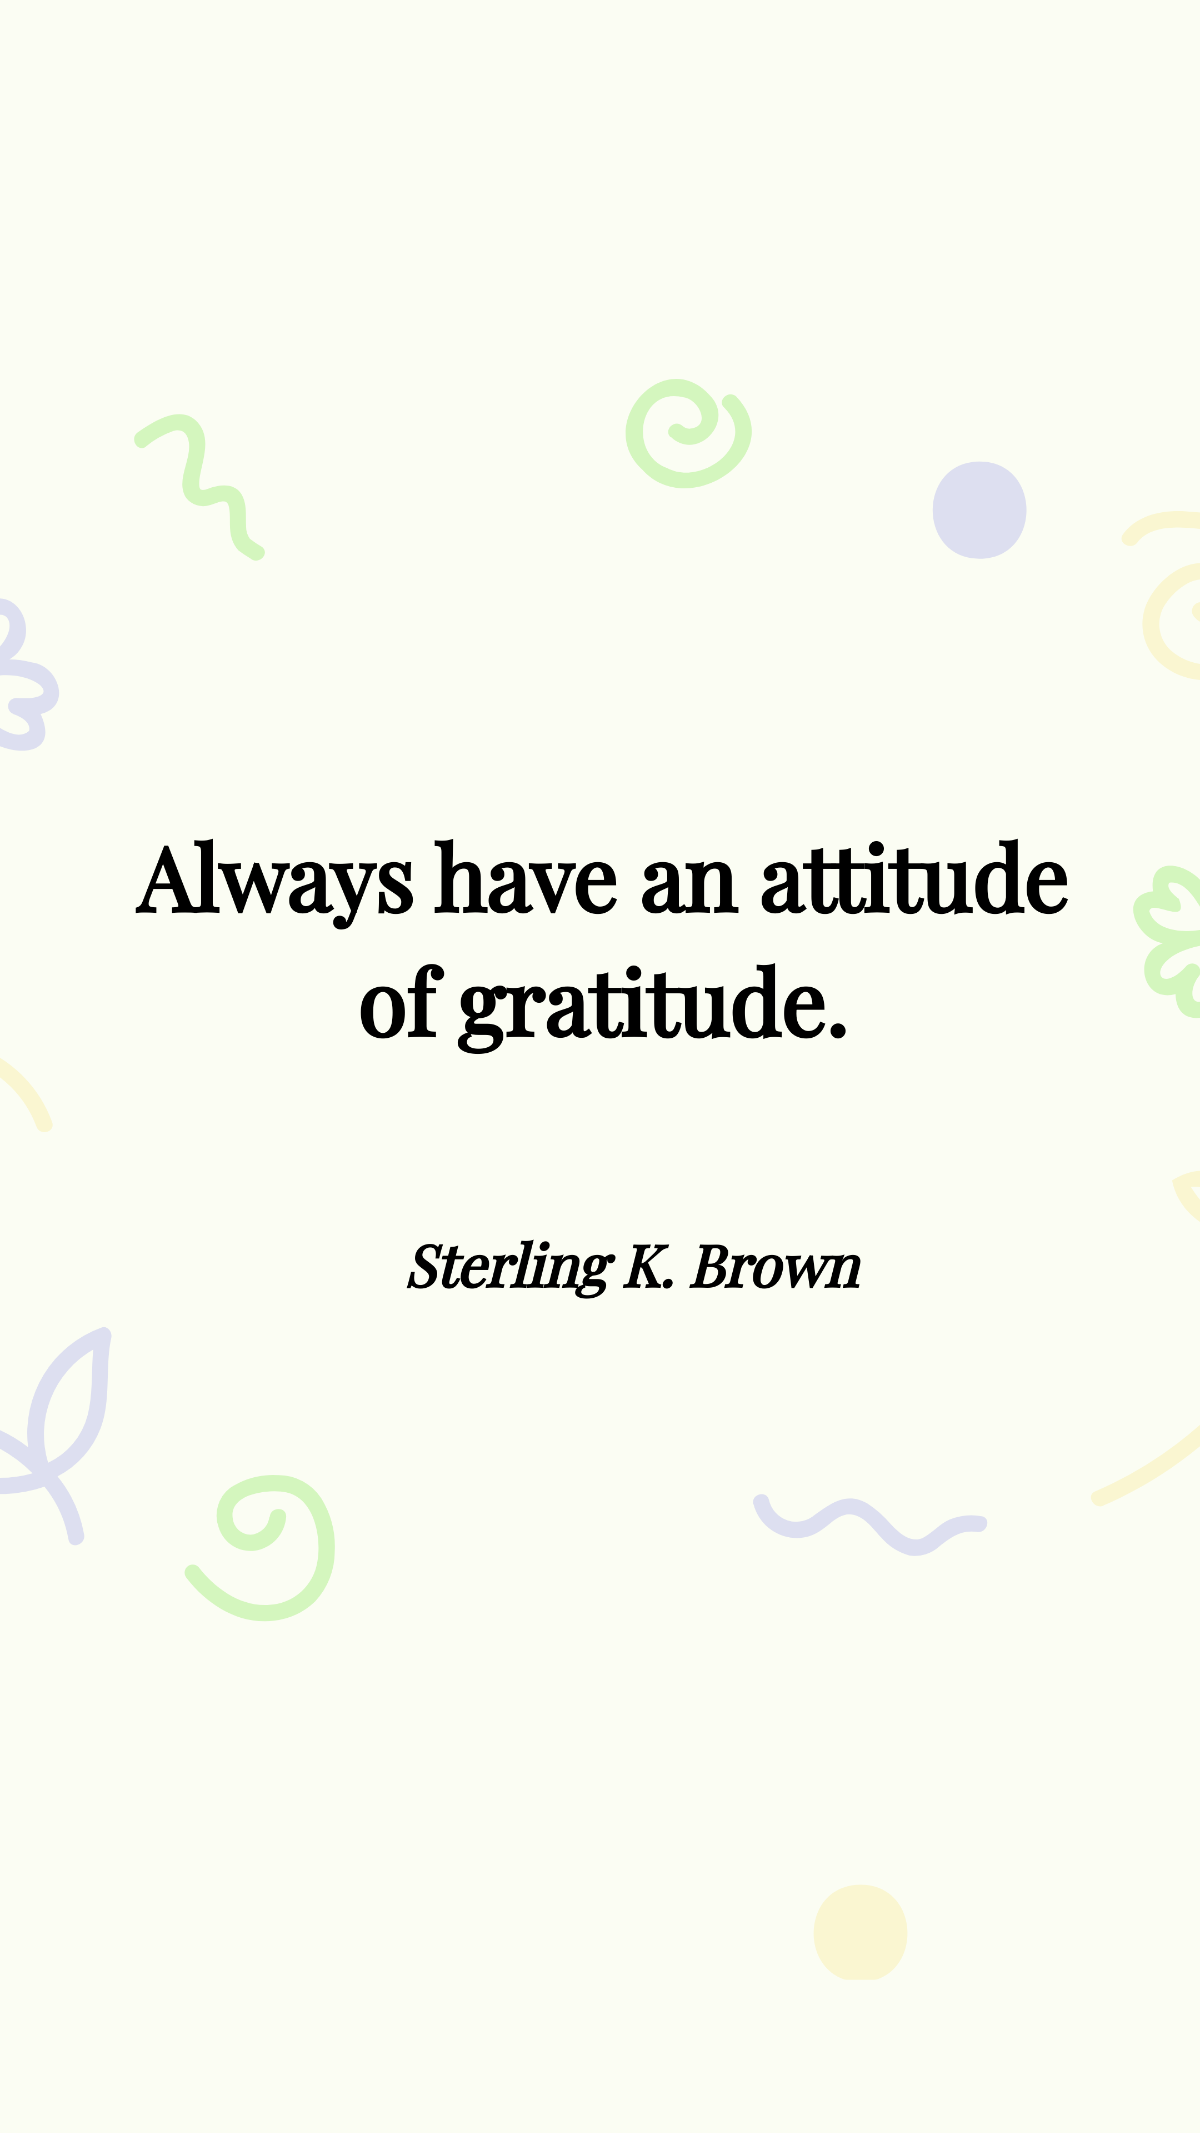 Sterling K. Brown - Always have an attitude of gratitude. Template